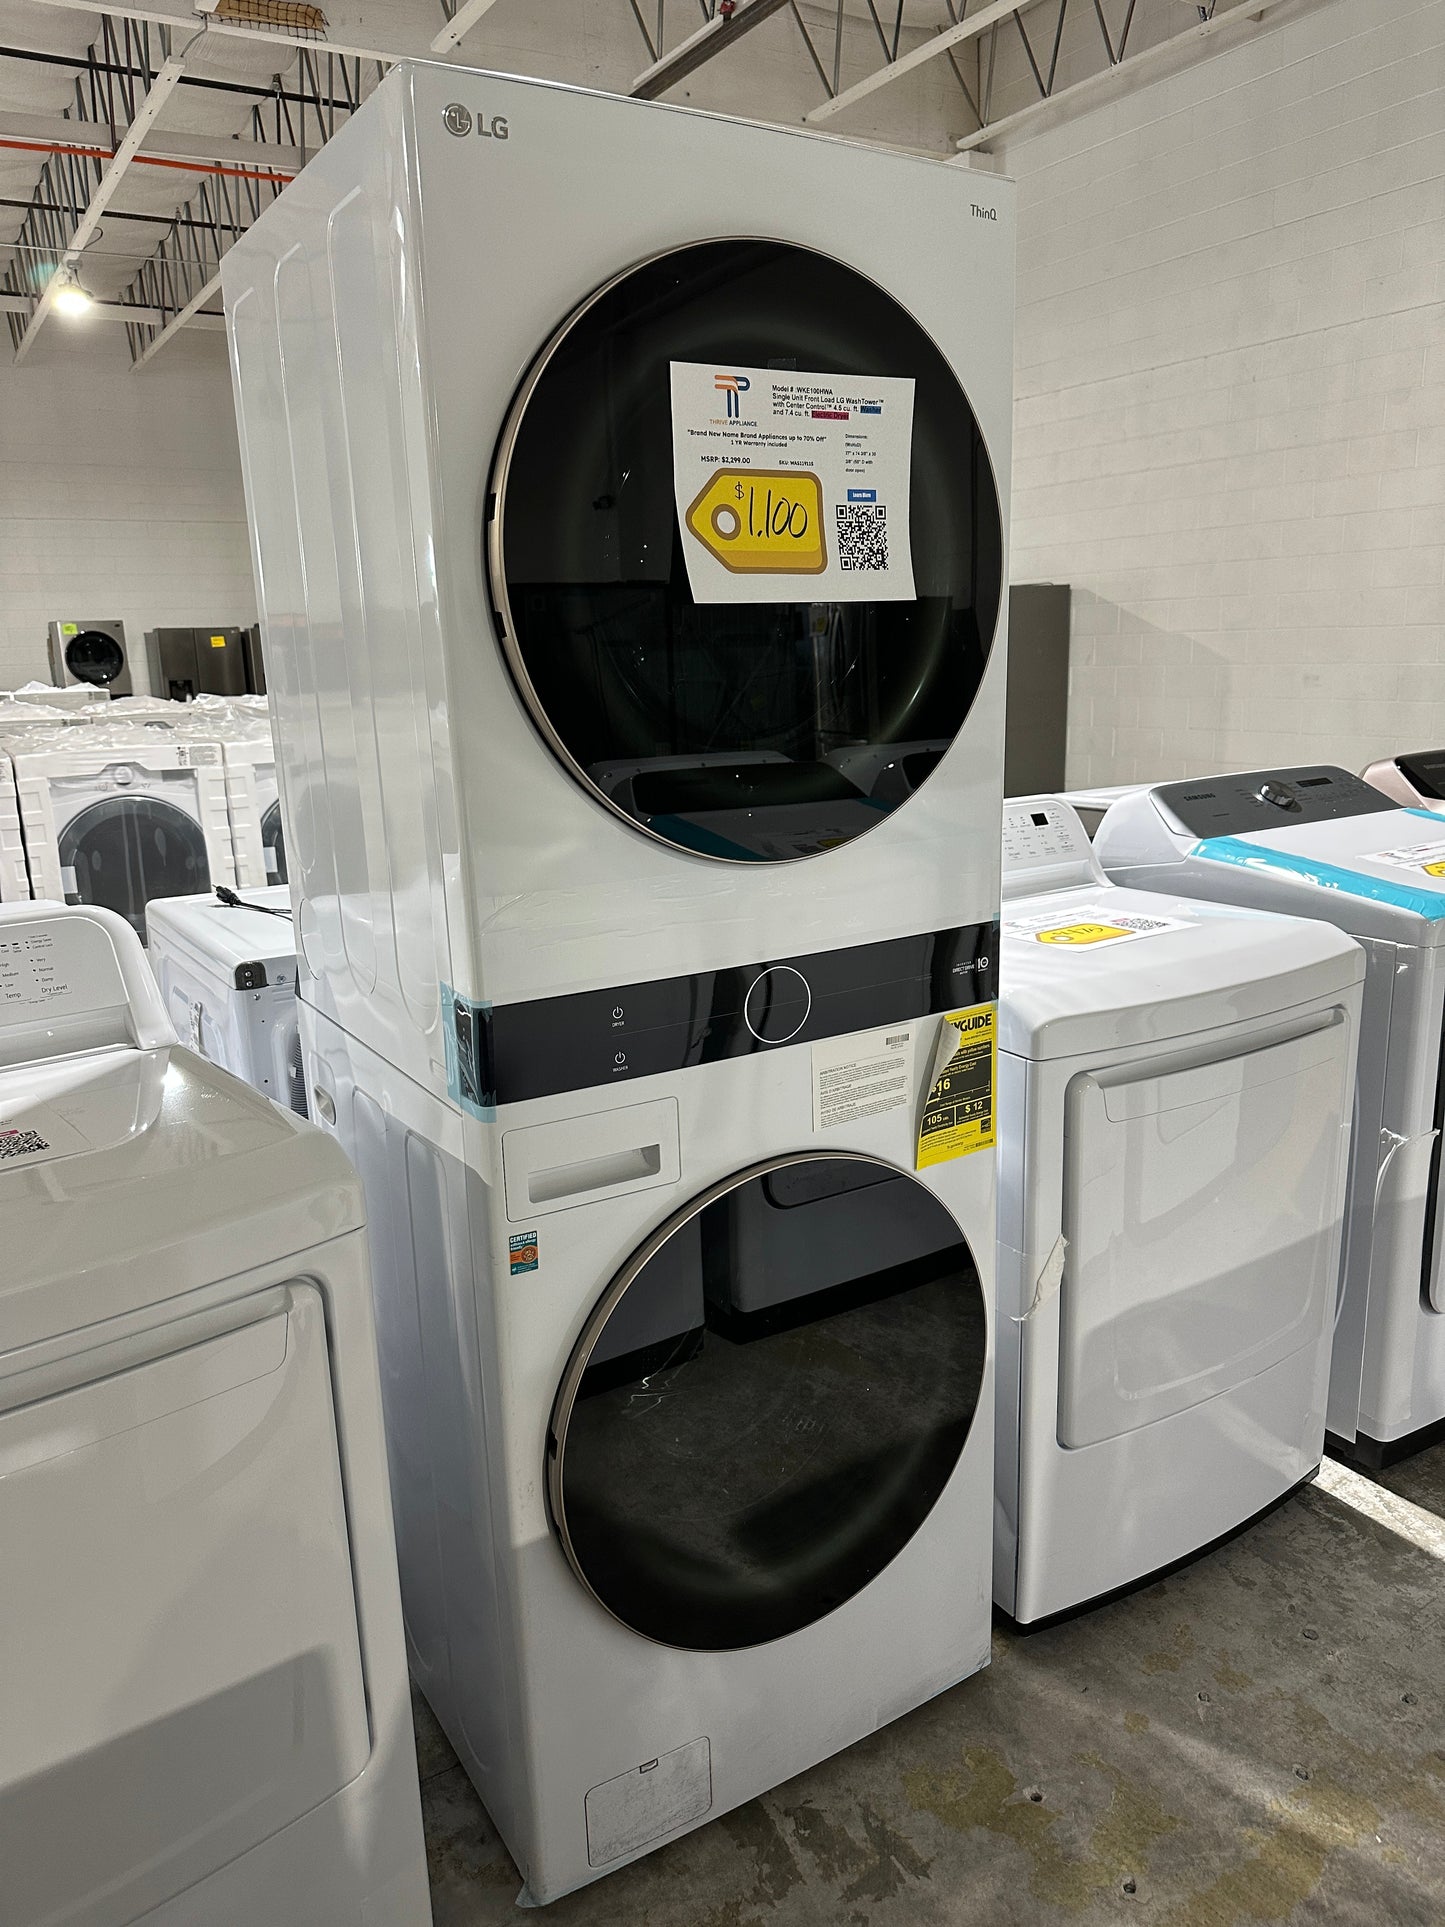 NEW LG SMART FRONT LOAD WASHER ELECTRIC DRYER TOWER Model:WKE100HWA  WAS11911S